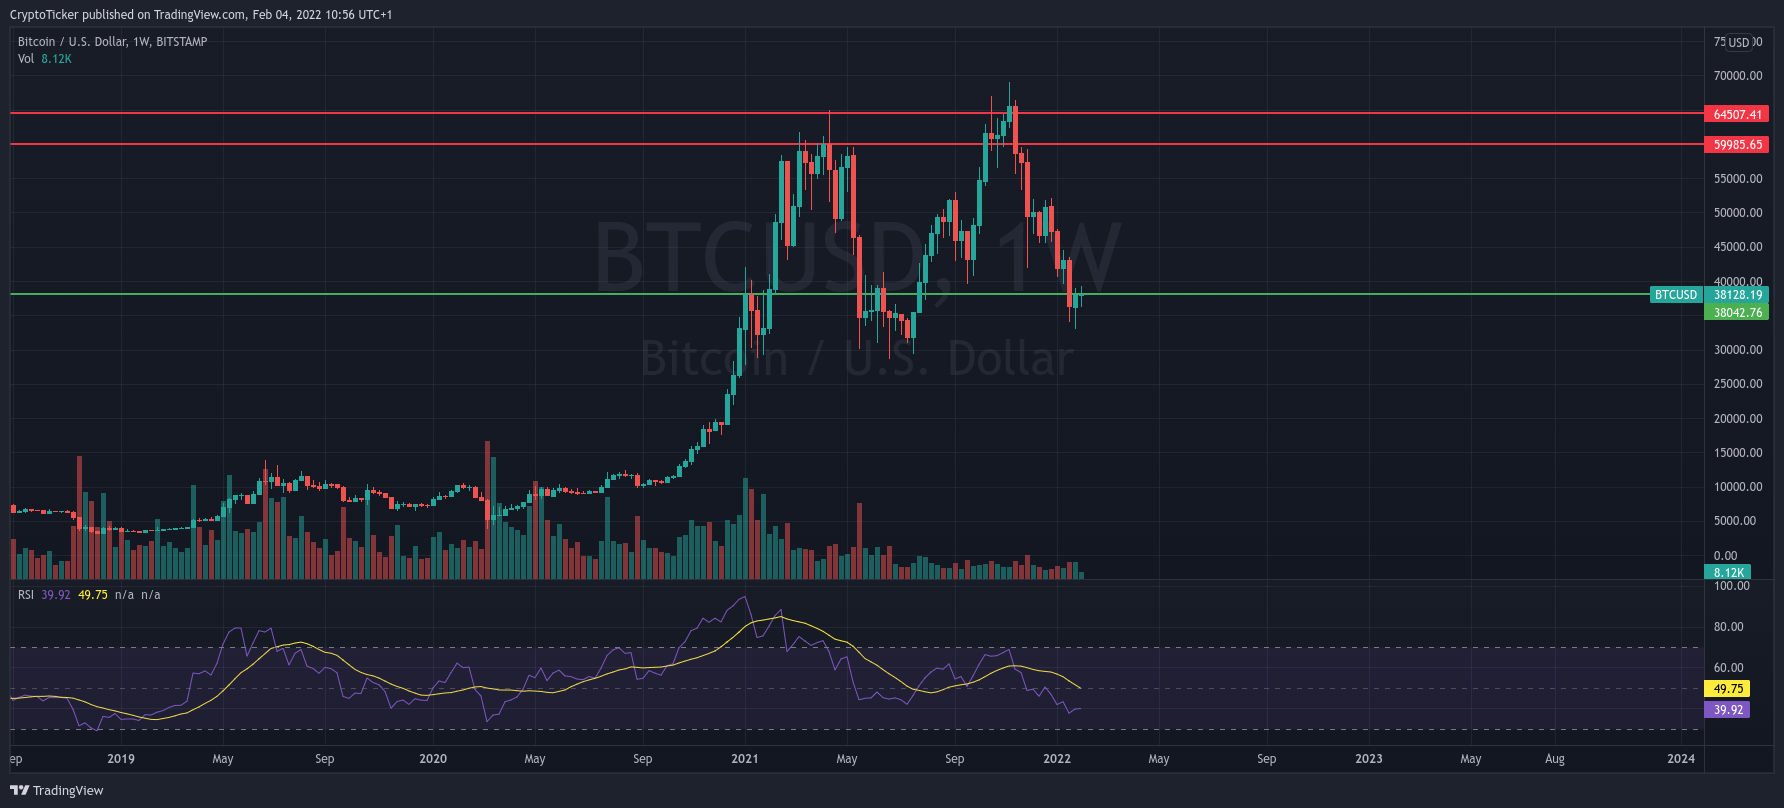 Bitcoin up: BTC/USD 1-week chart showing the reversal of BTC 